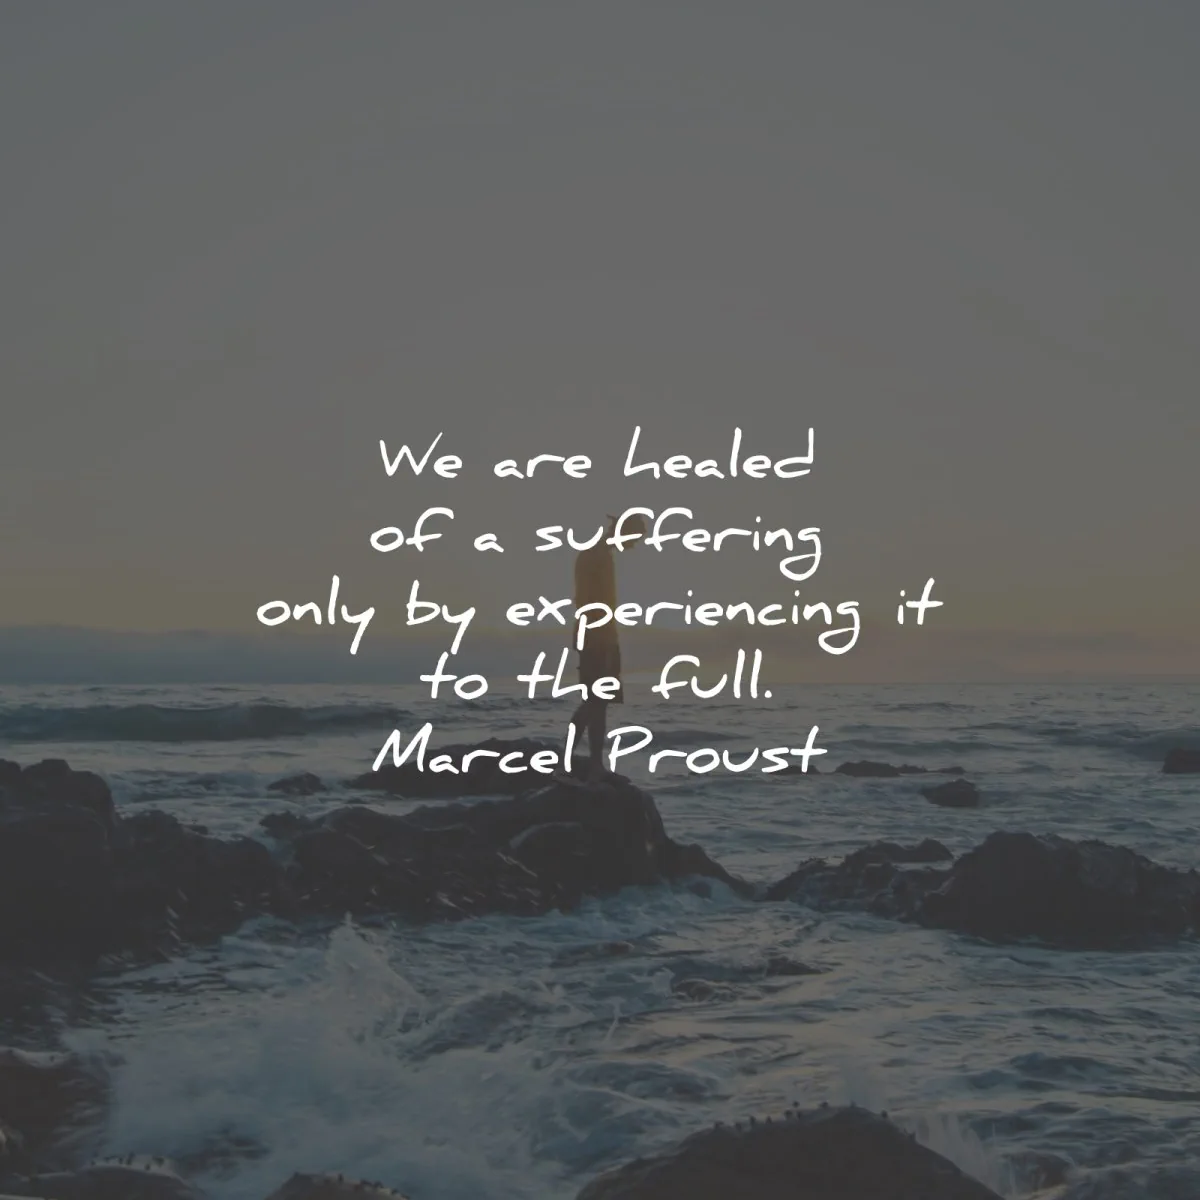 marcel proust quotes healed suffering experiencing full wisdom